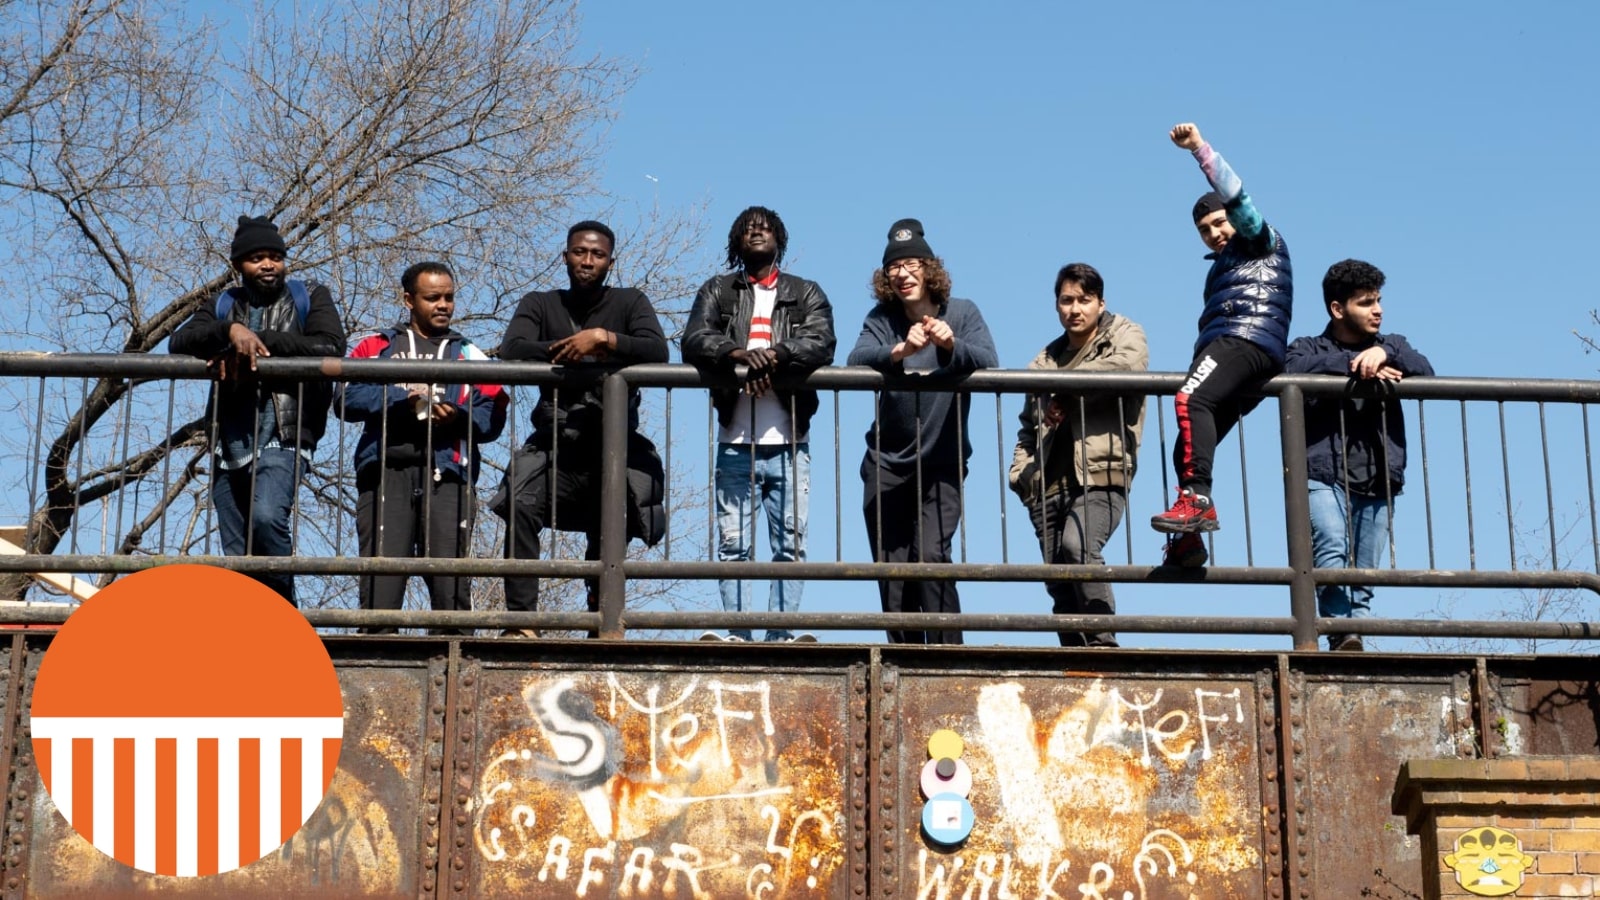 A group of people stand on a bridge looking down over the photographer - they look happy and confident, and one is sitting on the railing of the bridge punching his fist in the air